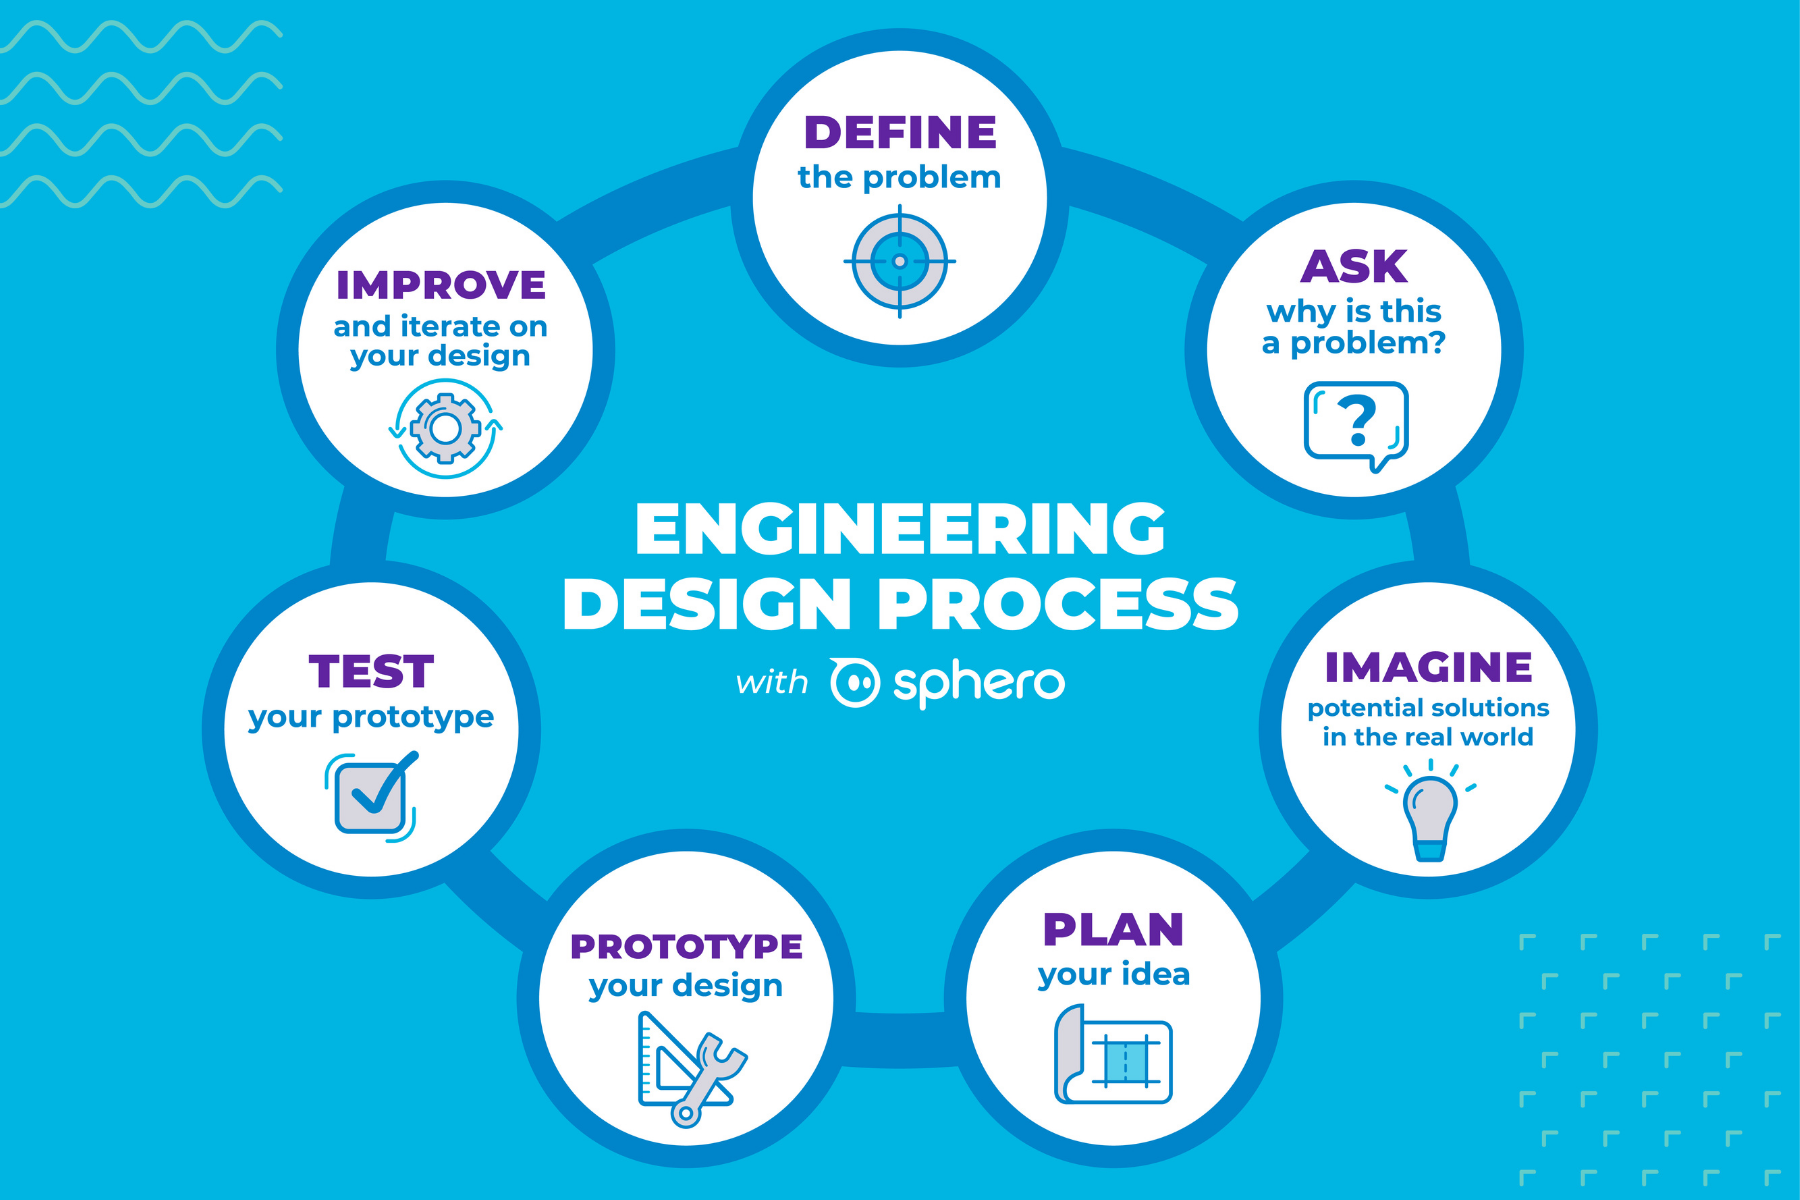 What Is The 5th Step In The Engineering Design Process - Design Talk